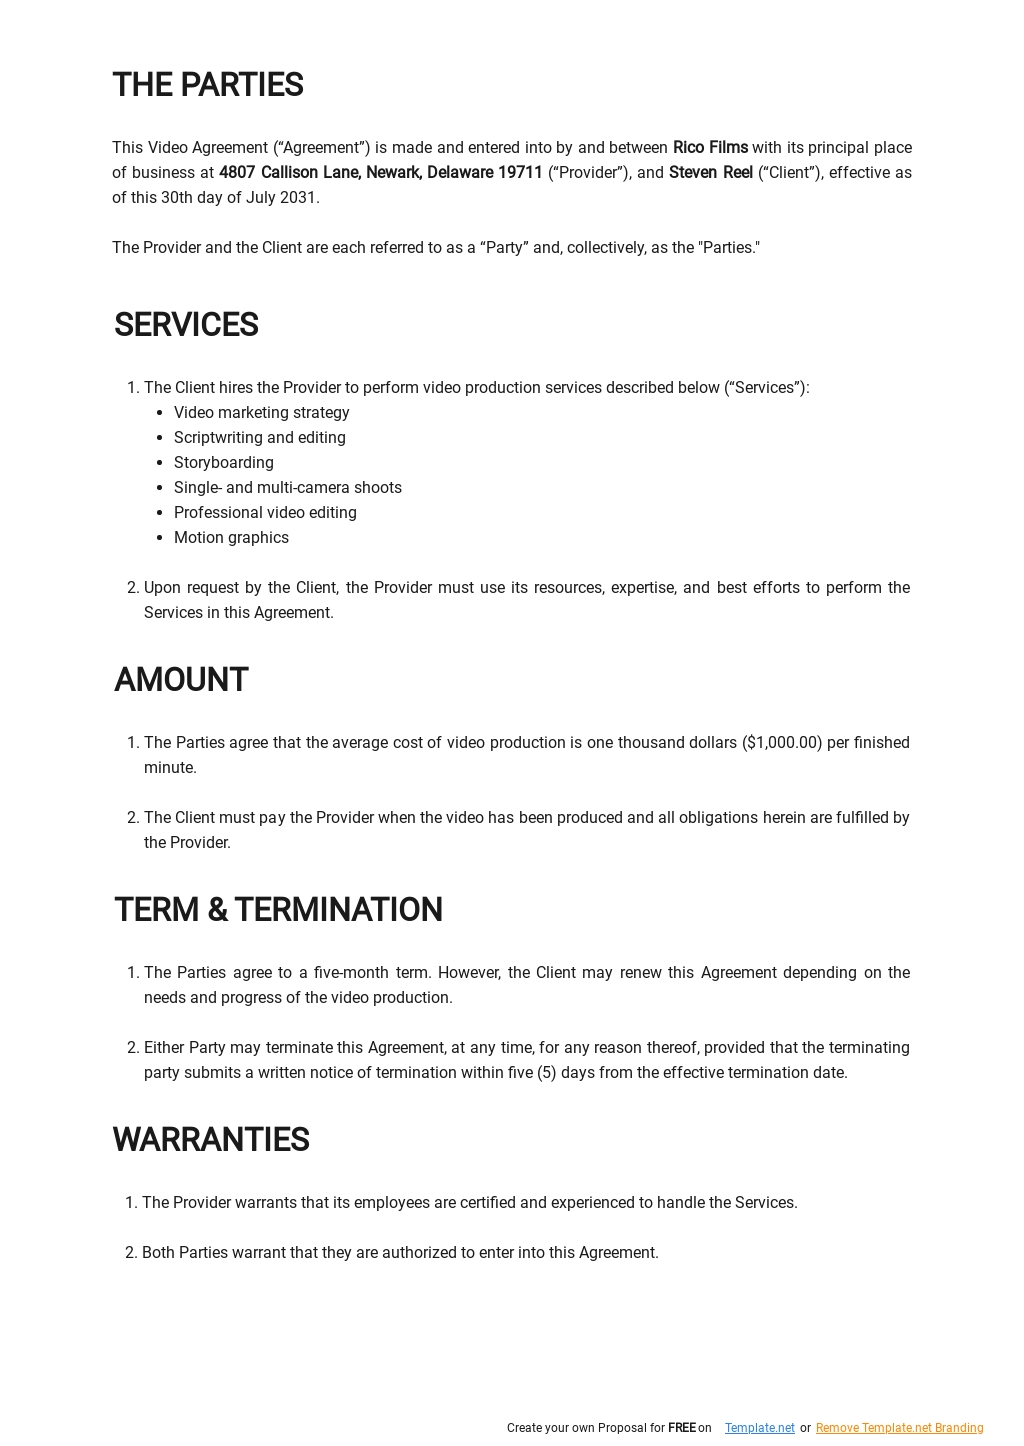 Video Production Services Agreement Template 1.jpe